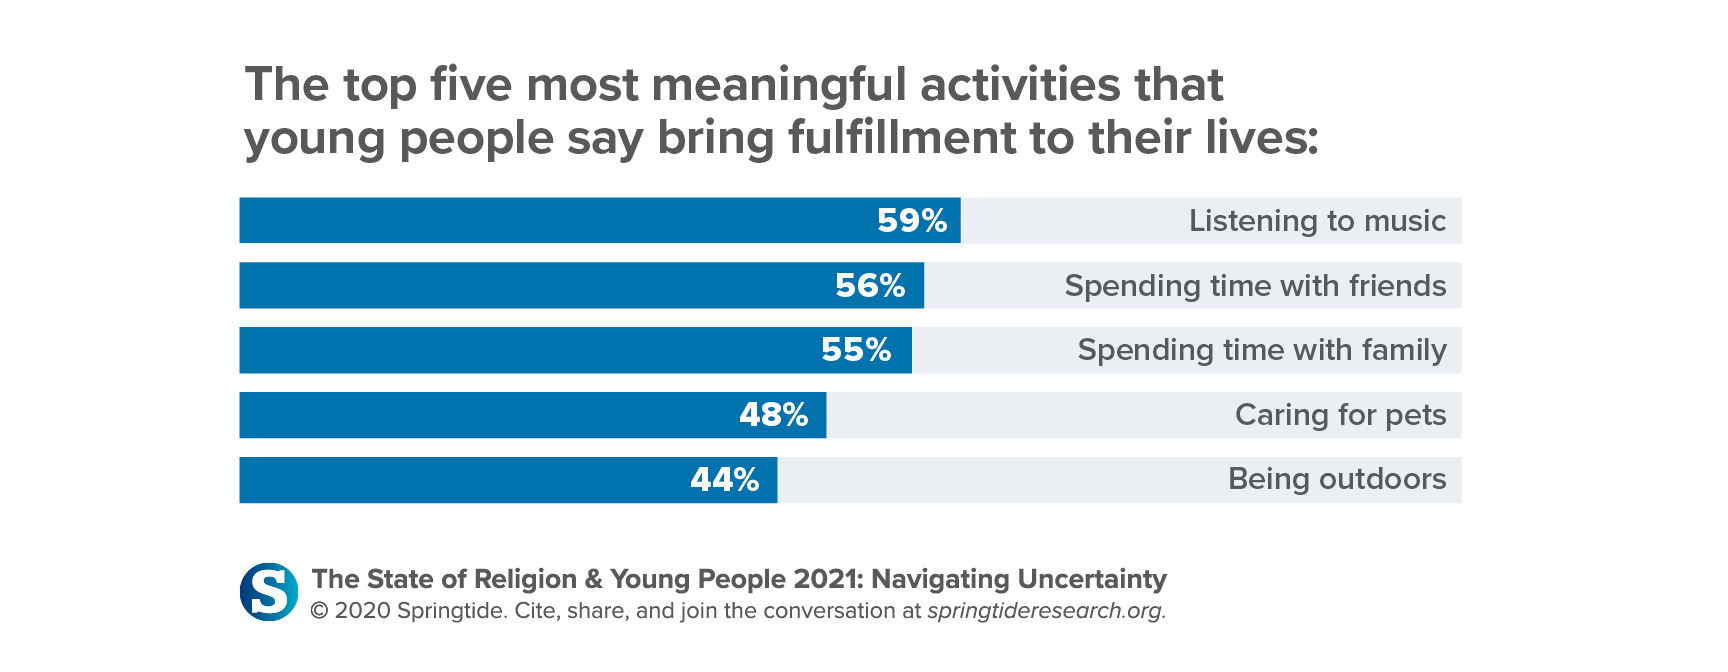 The top five most meaningful activities that young people say bring fulfillment to their lives: 59% Listening to music 56% Spending time with friends 55% Spending time with family 48% Caring for pets 44% Being outdoors